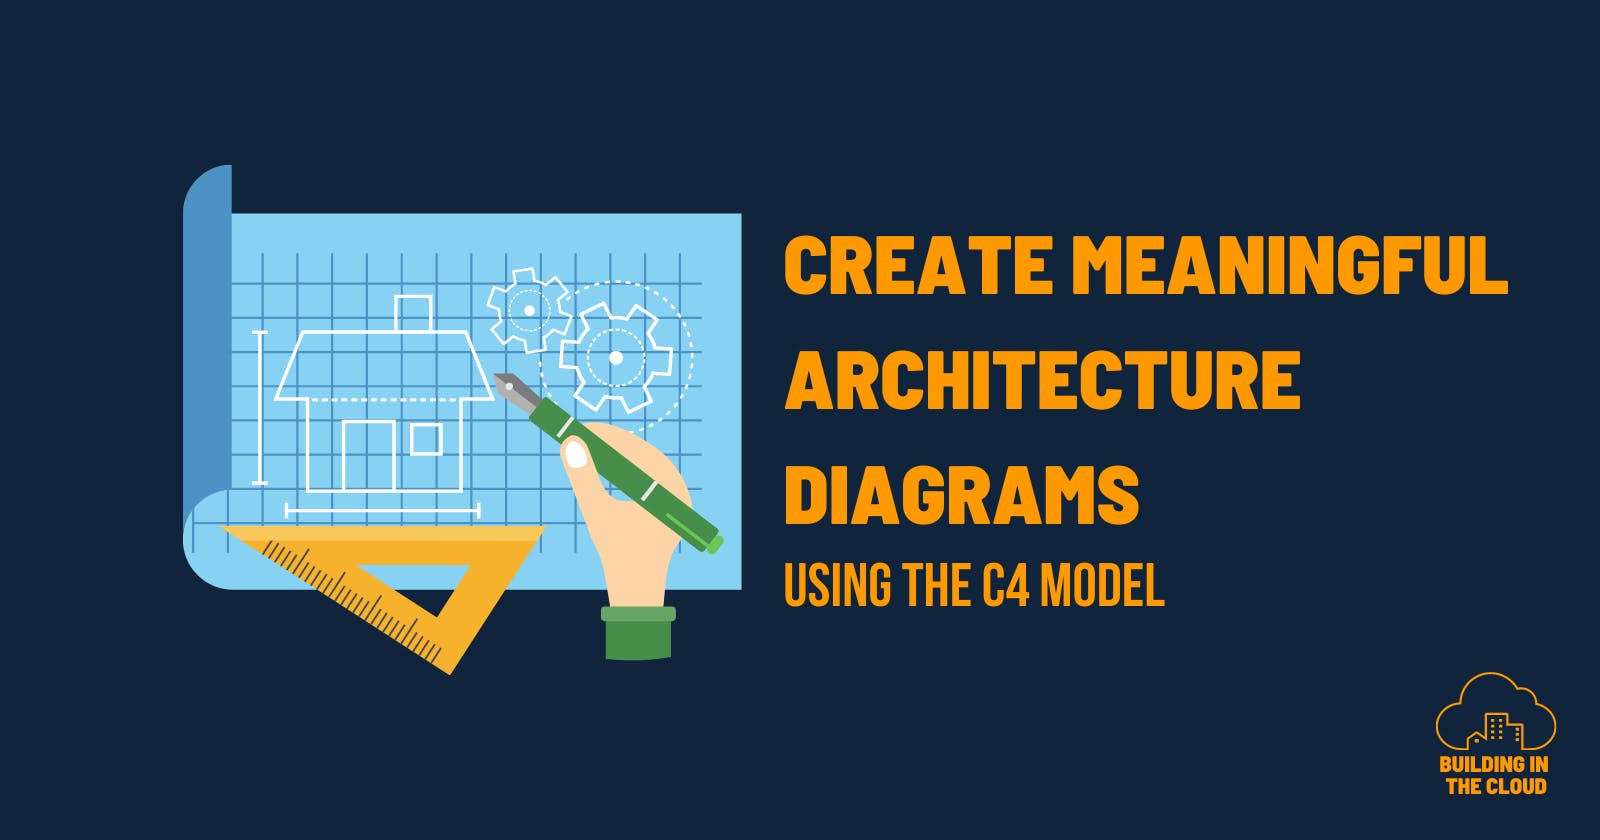 Create meaningful architecture diagrams using the C4 model